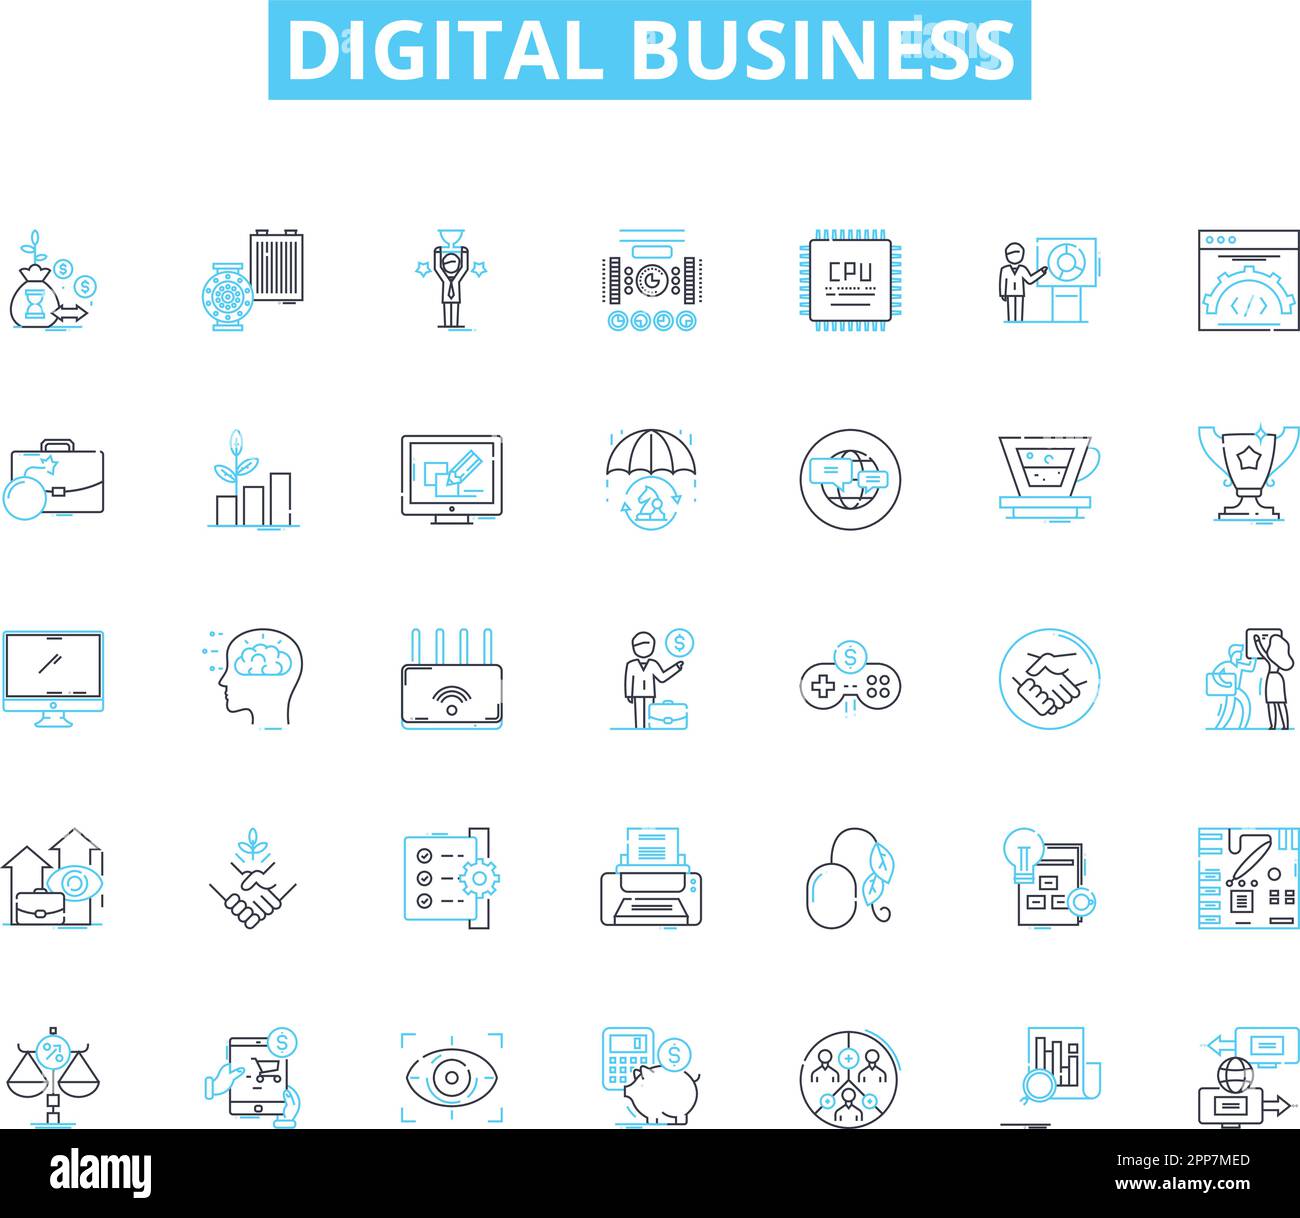 Digital business linear icons set. E-commerce, Innovation, Online, Marketing, Analytics, Cybersecurity, Platform line vector and concept signs. Social Stock Vector